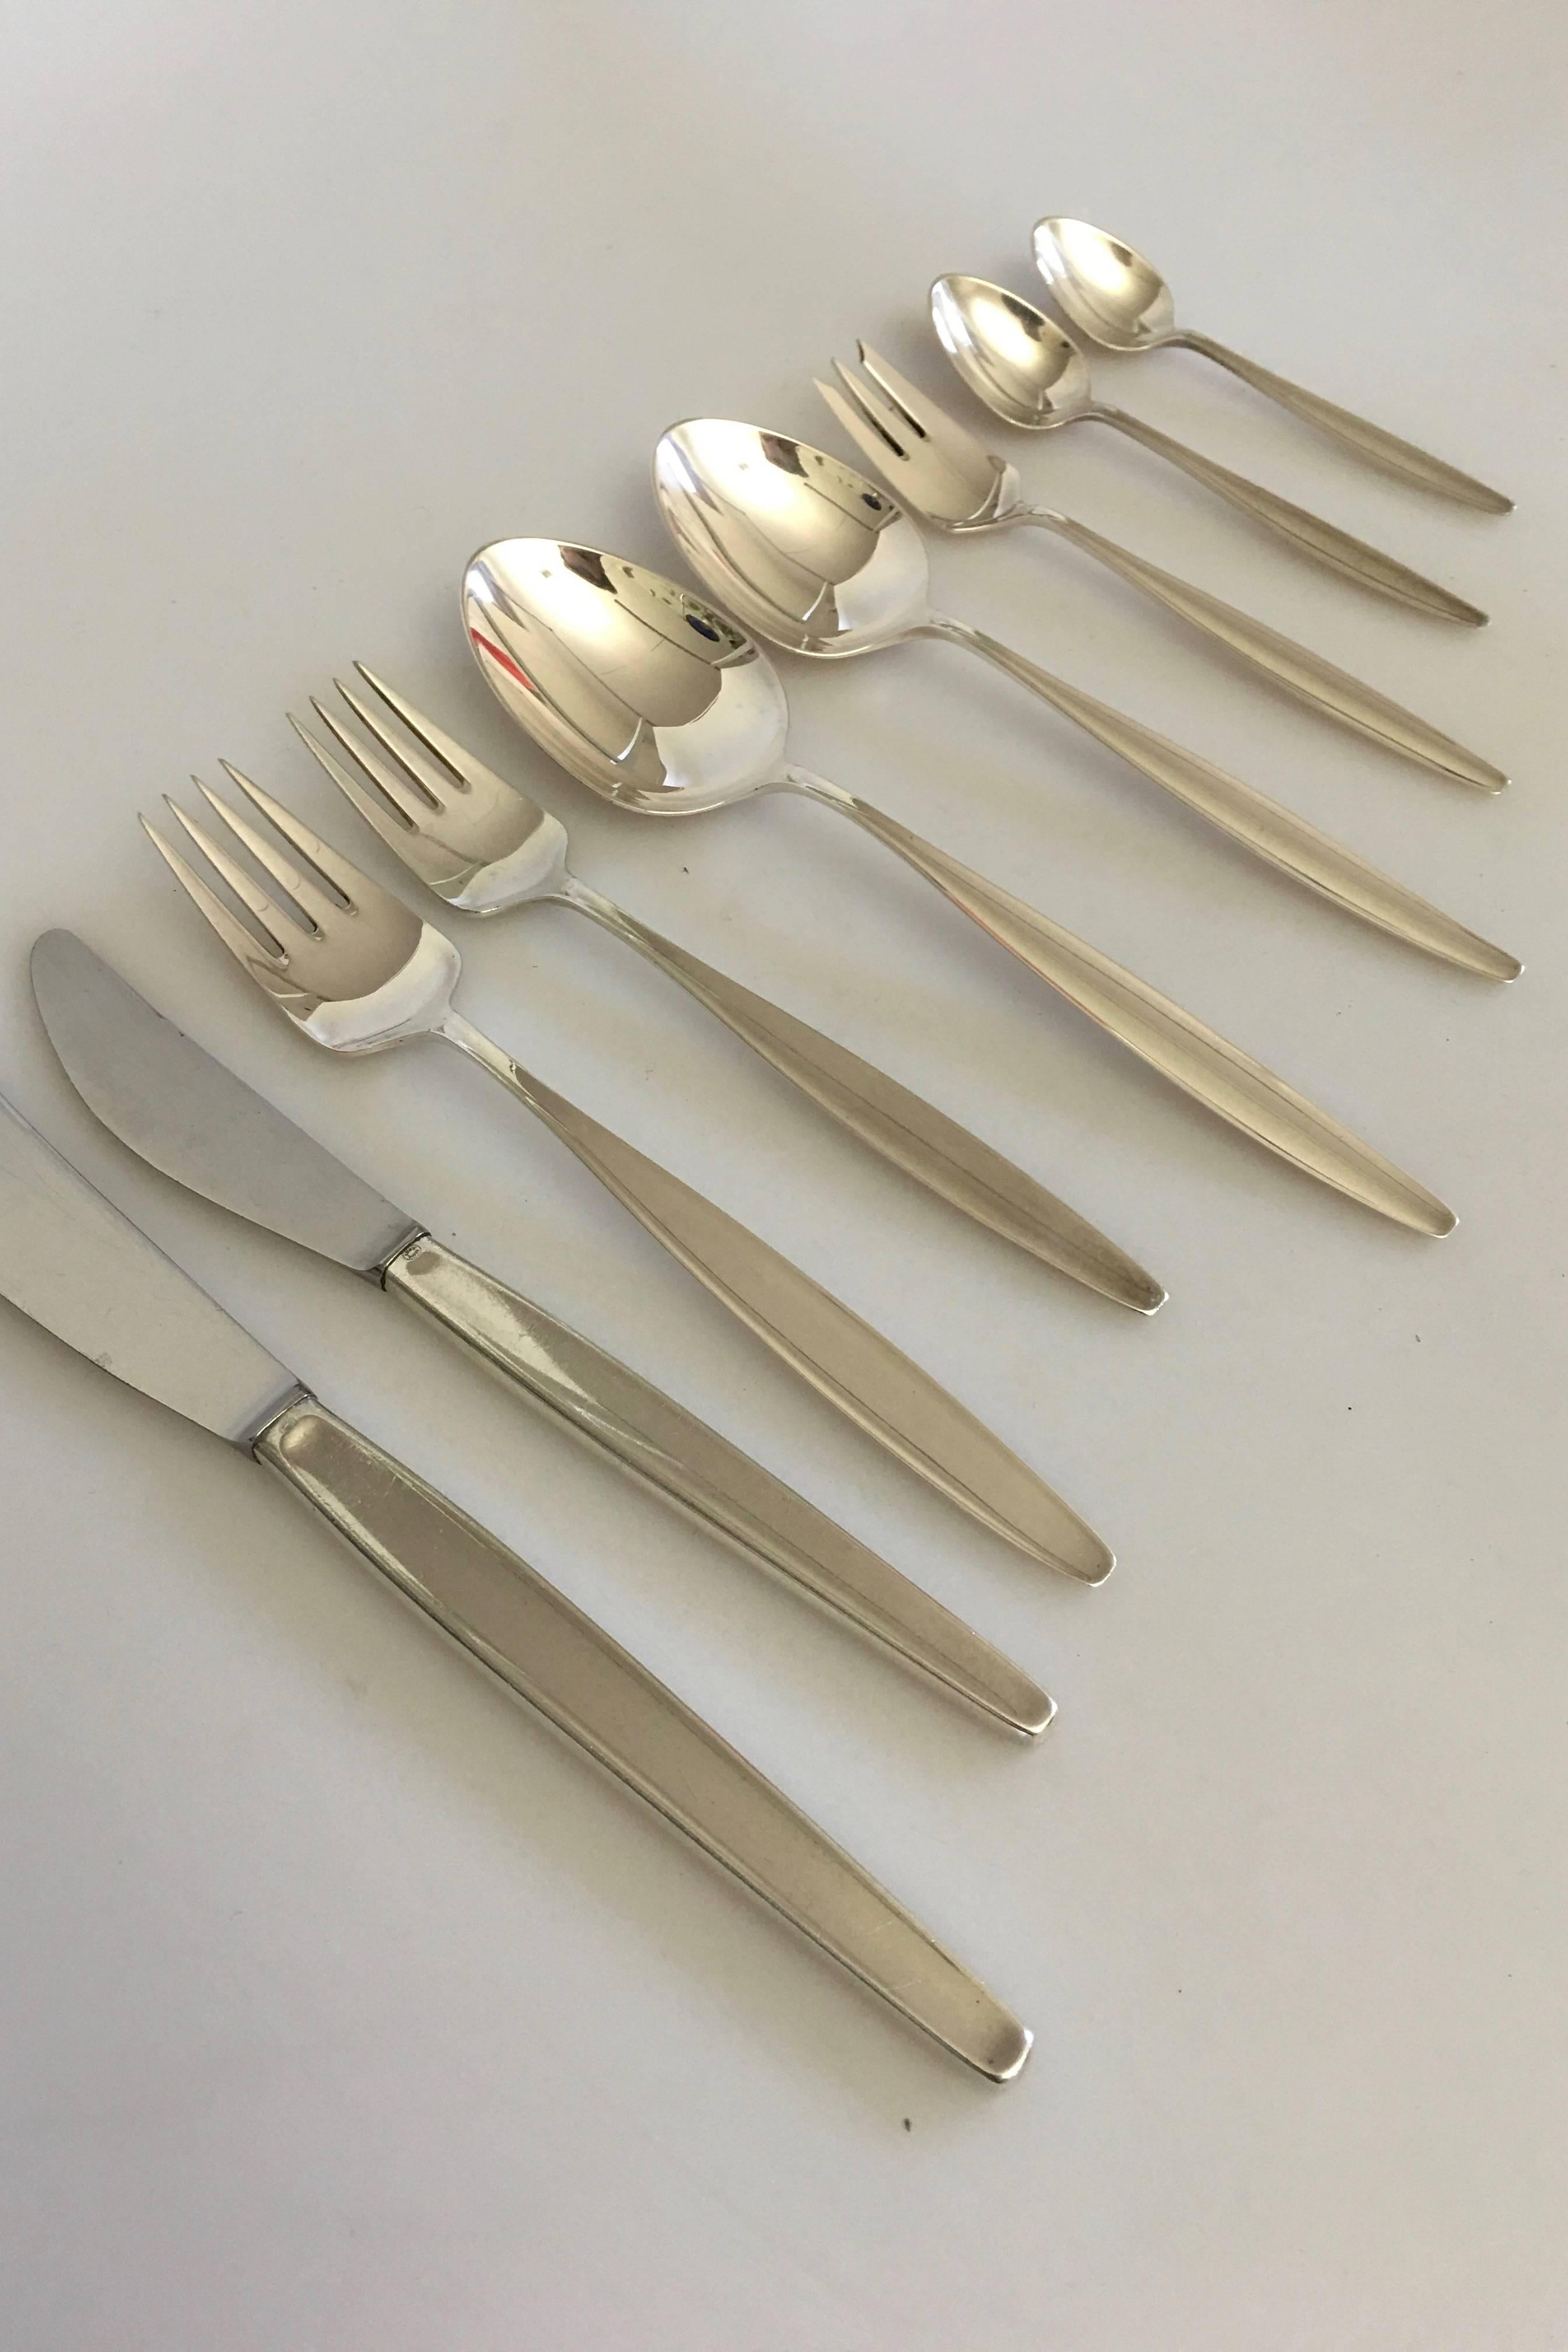 Georg Jensen sterling silver 'Cypress' set of 108 pieces for 12 persons.

12 x dinner knifes 22.4 cm L (8 13/16